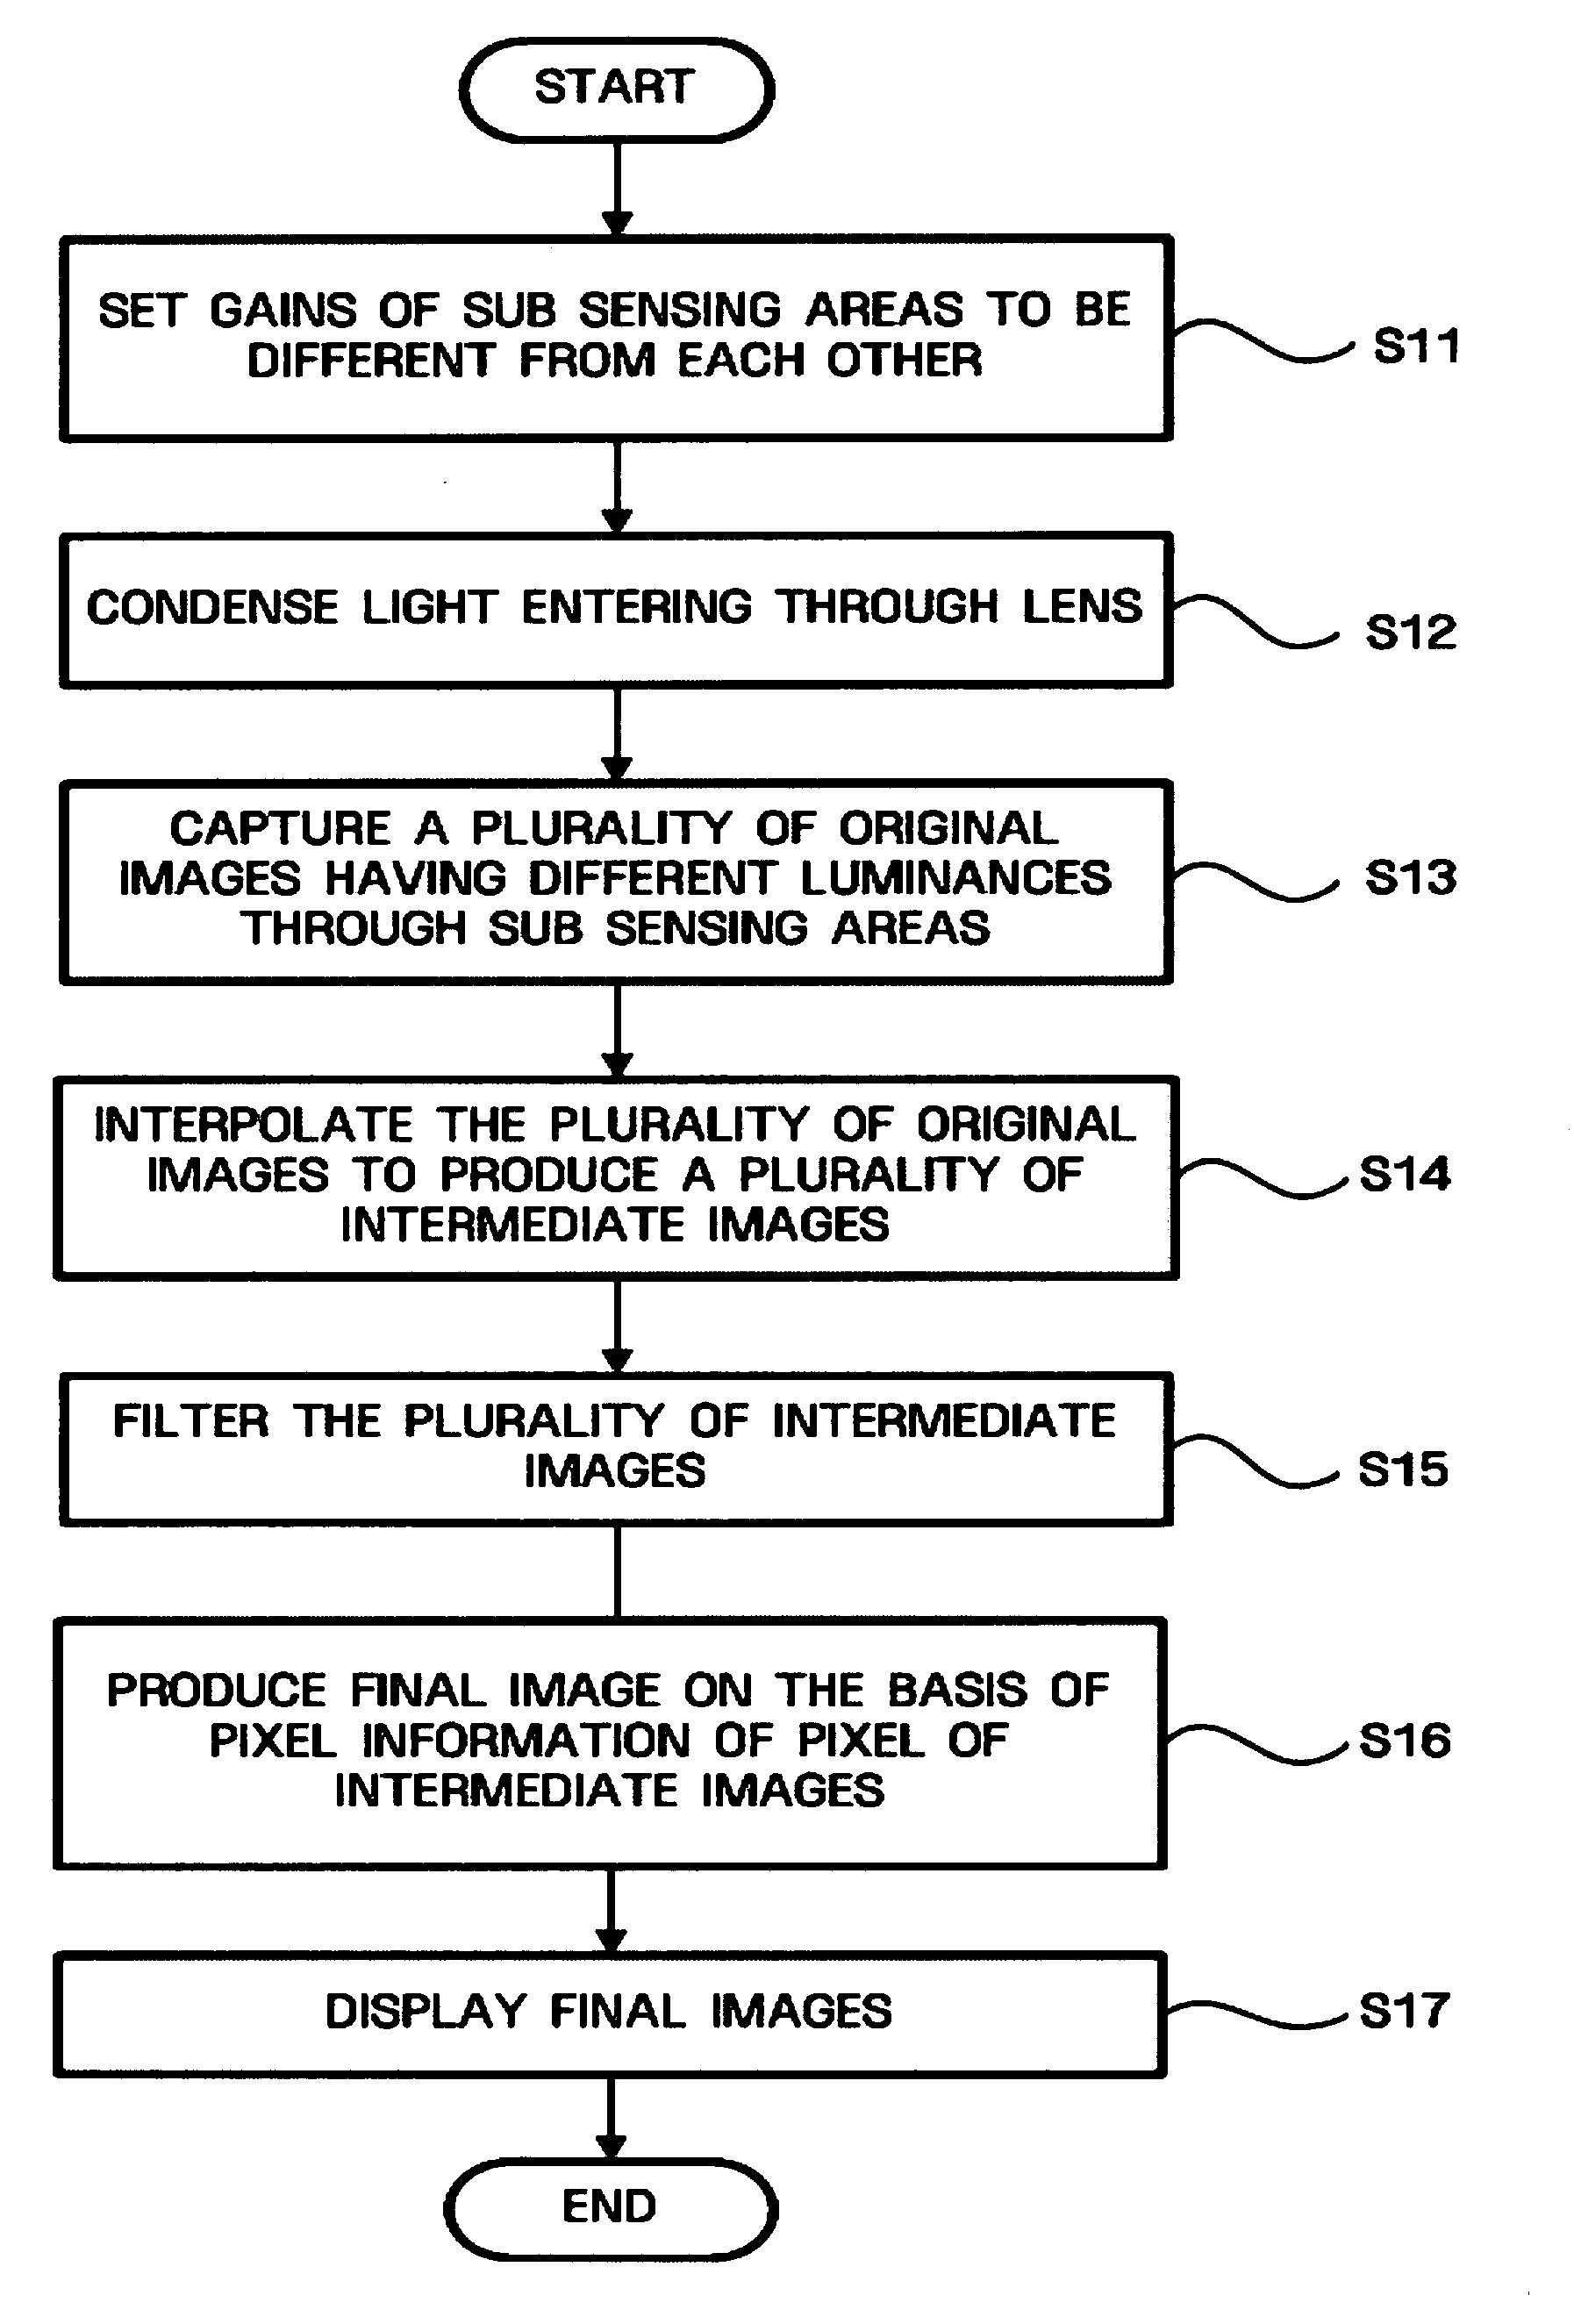 Image display apparatus and method of supporting high quality image